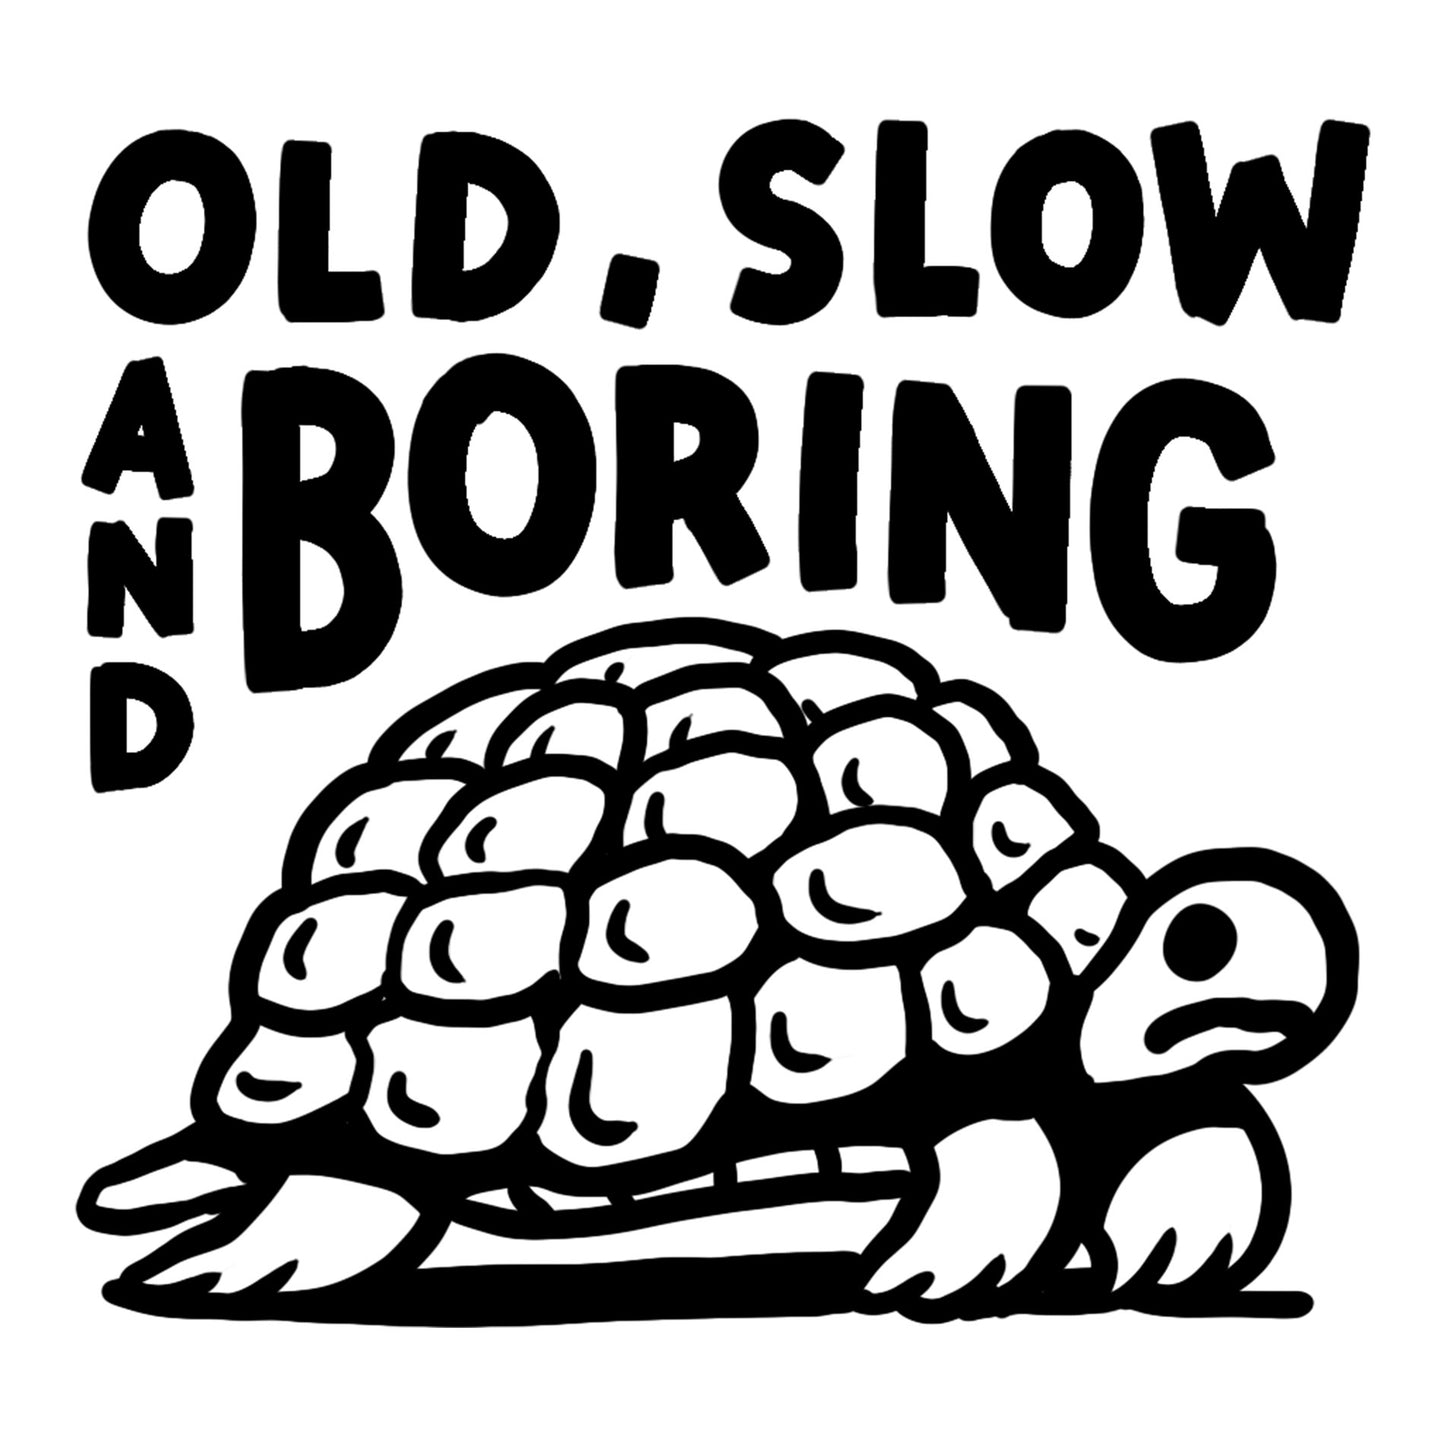 Old Slow Boring